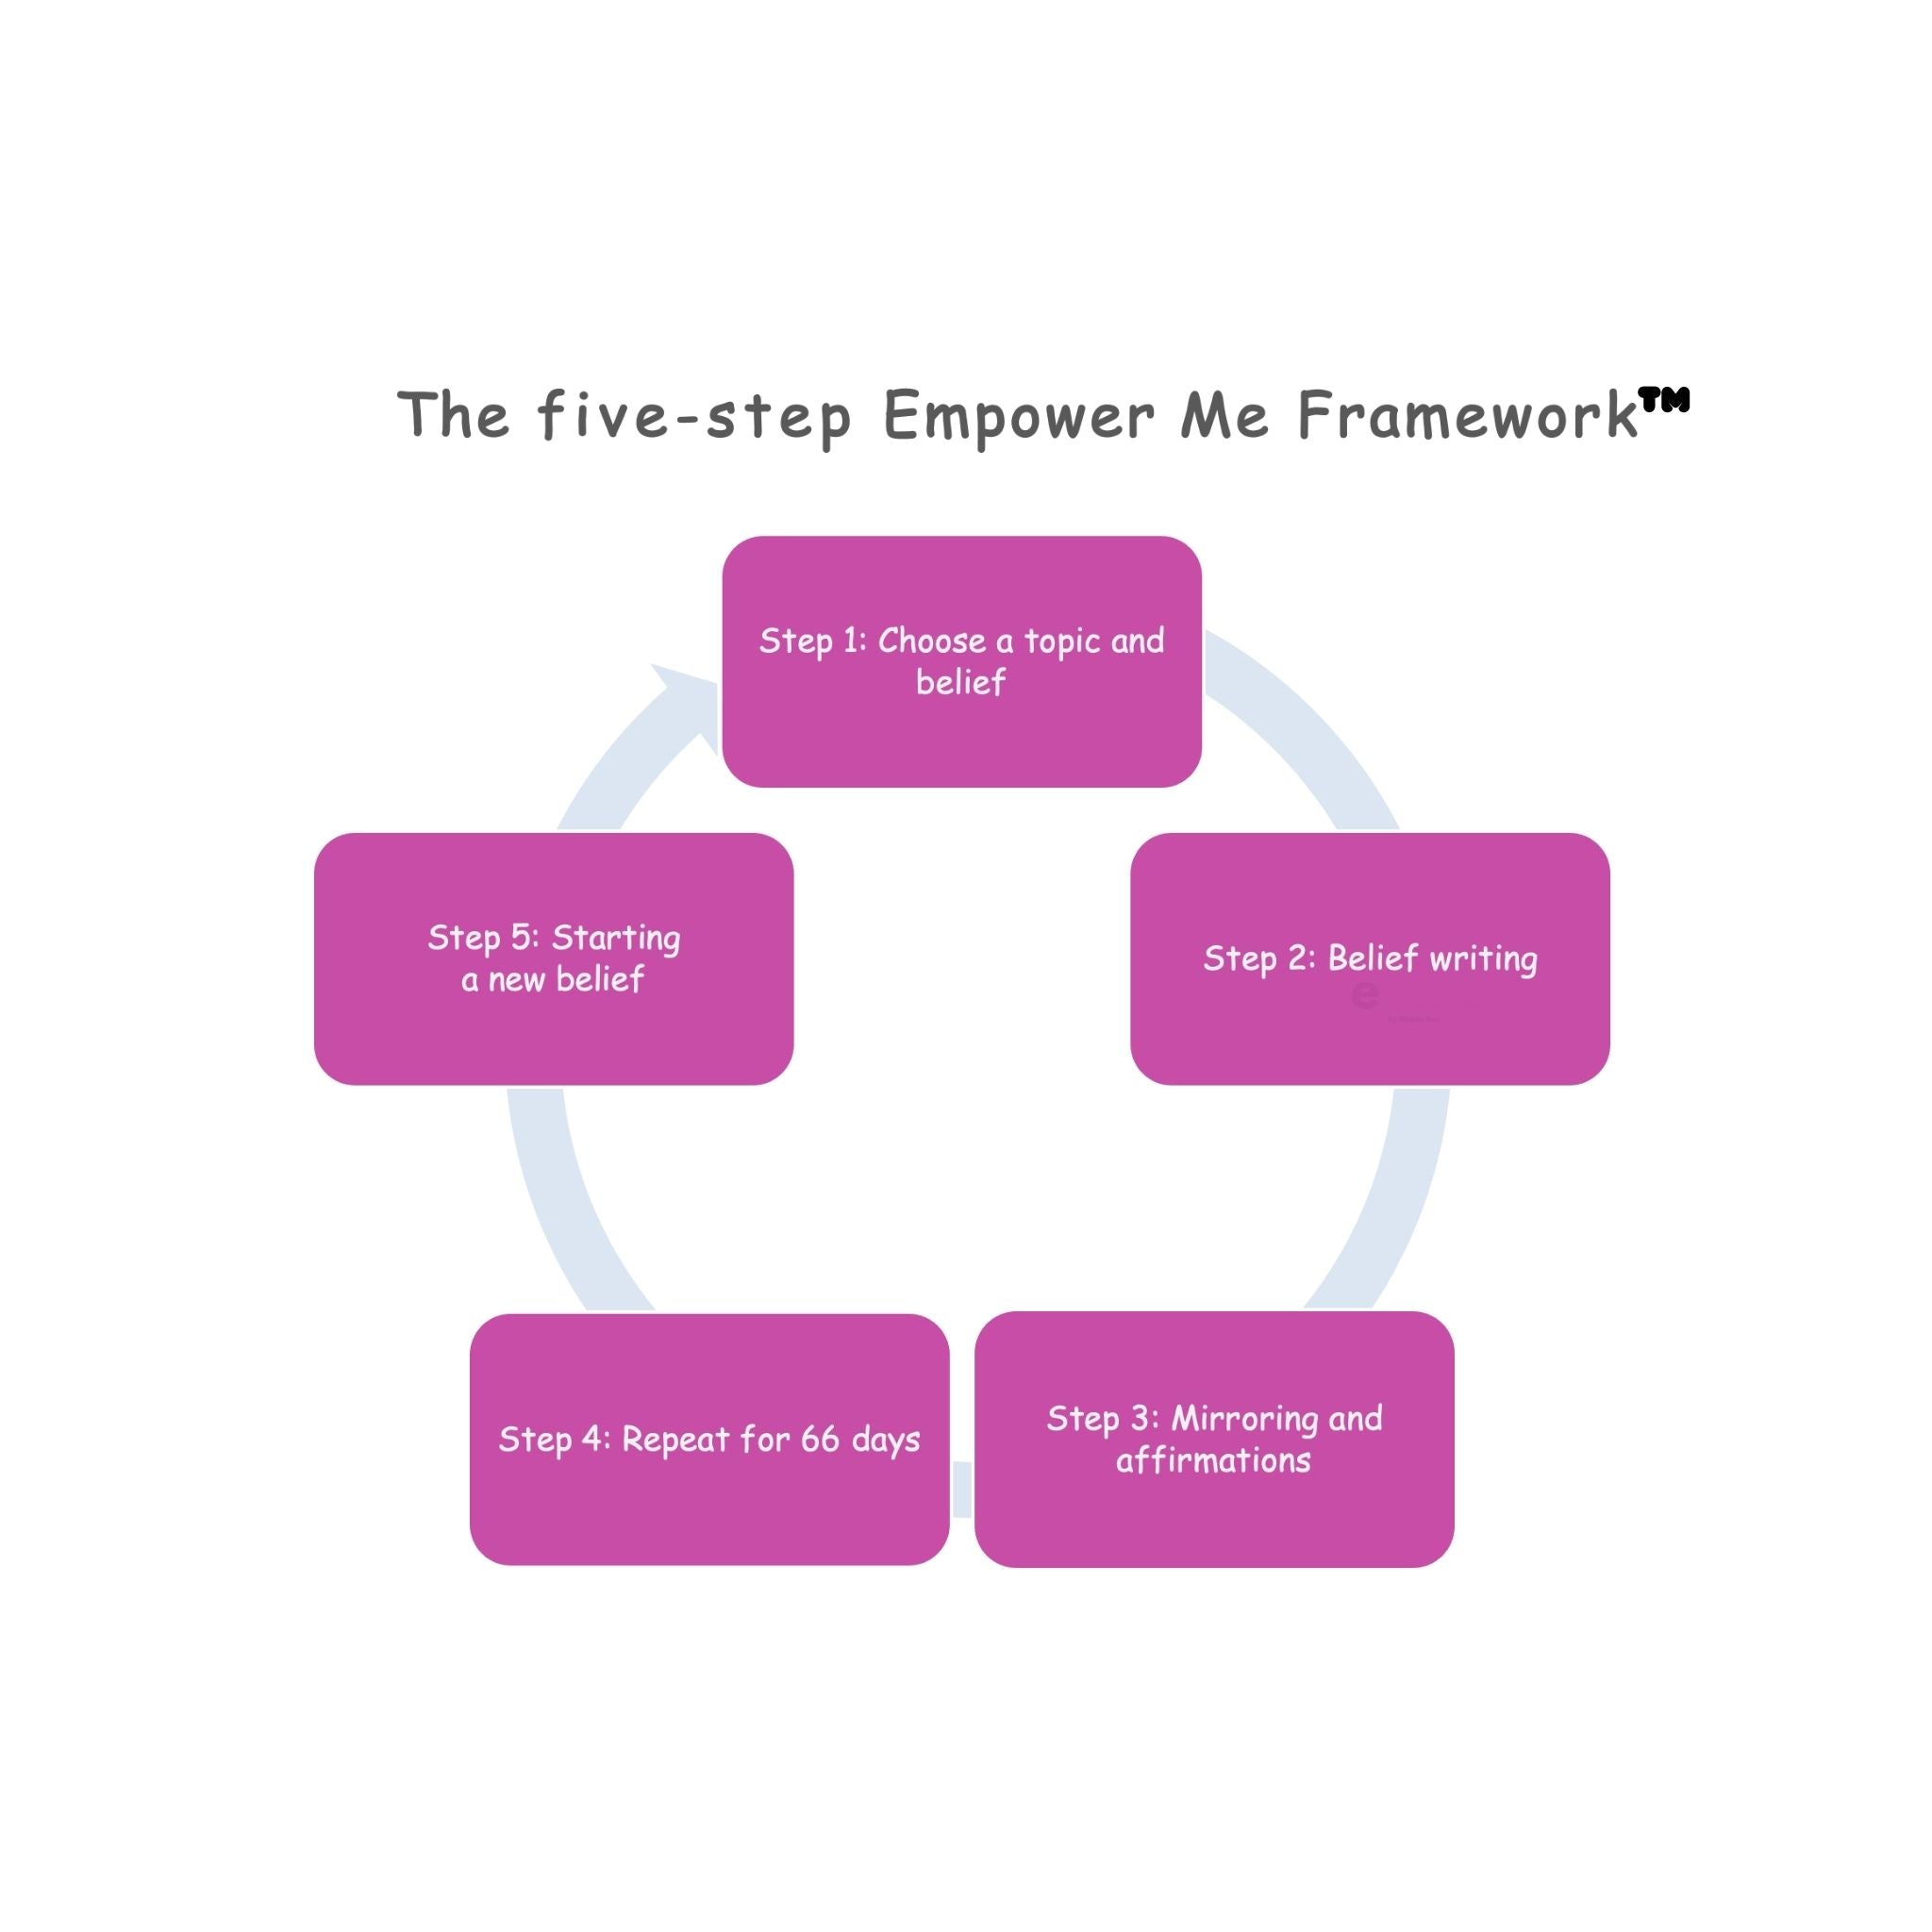 Flow diagram of the five-step Empower Me Framework by Midula Dey in eBooks